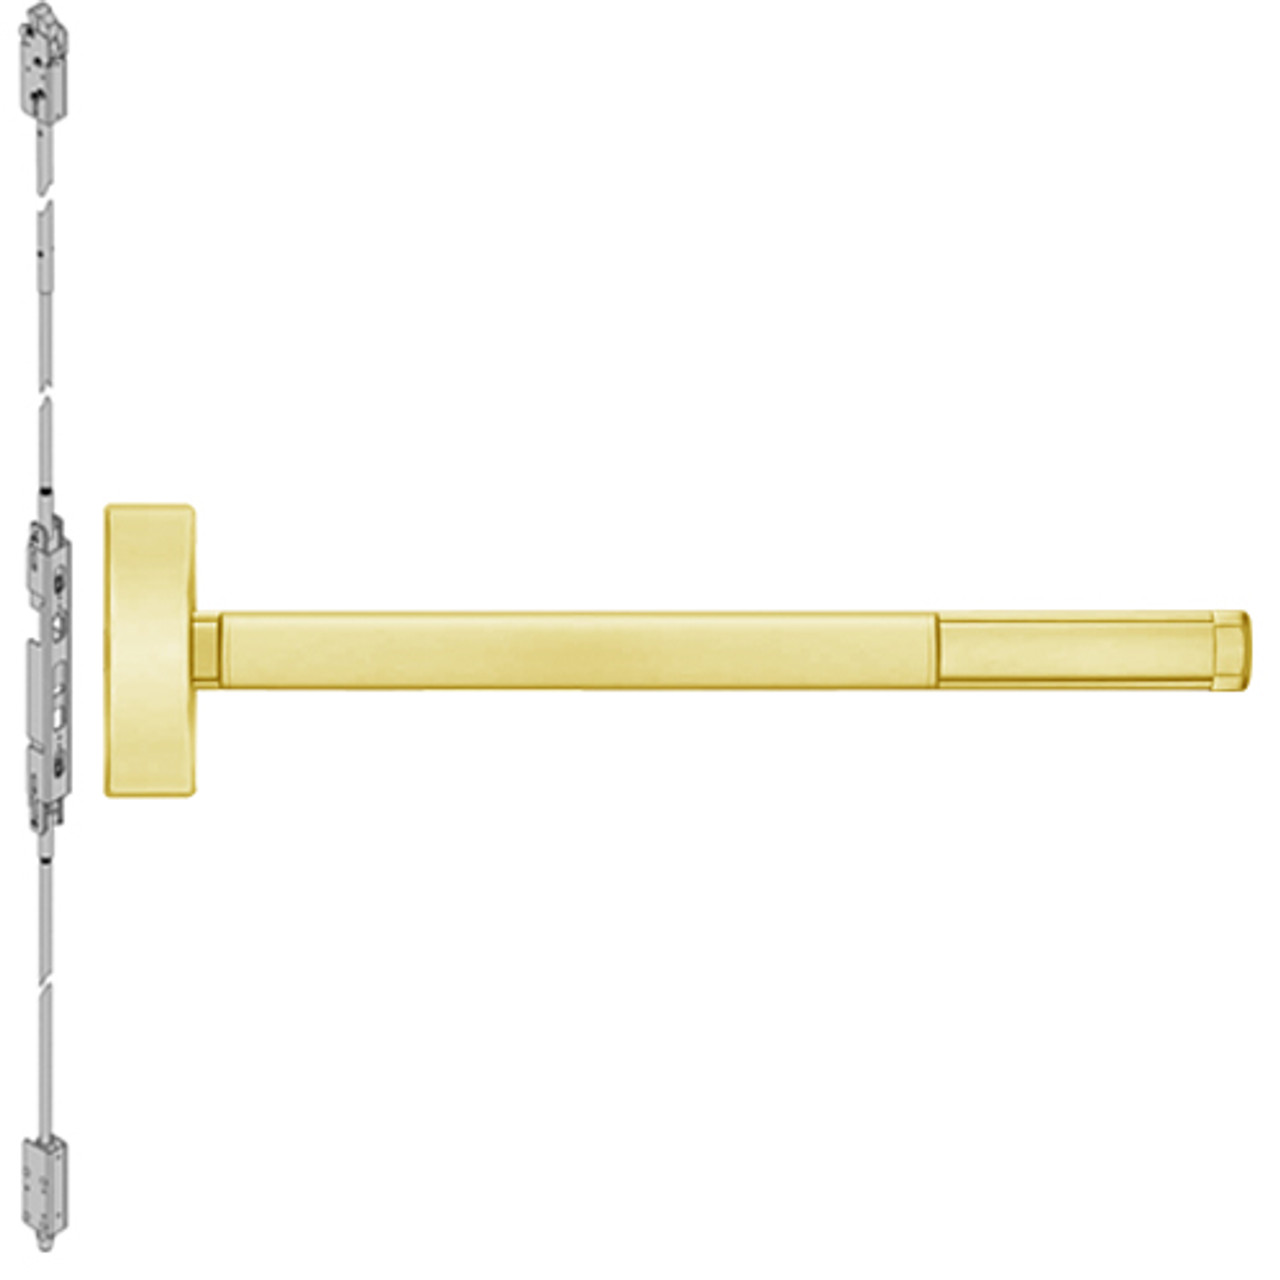 TS2803LBR-605-48 PHI 2800 Series Concealed Vertical Rod Exit Device with Touchbar Monitoring Switch Prepped for Key Retracts Latchbolt in Bright Brass Finish